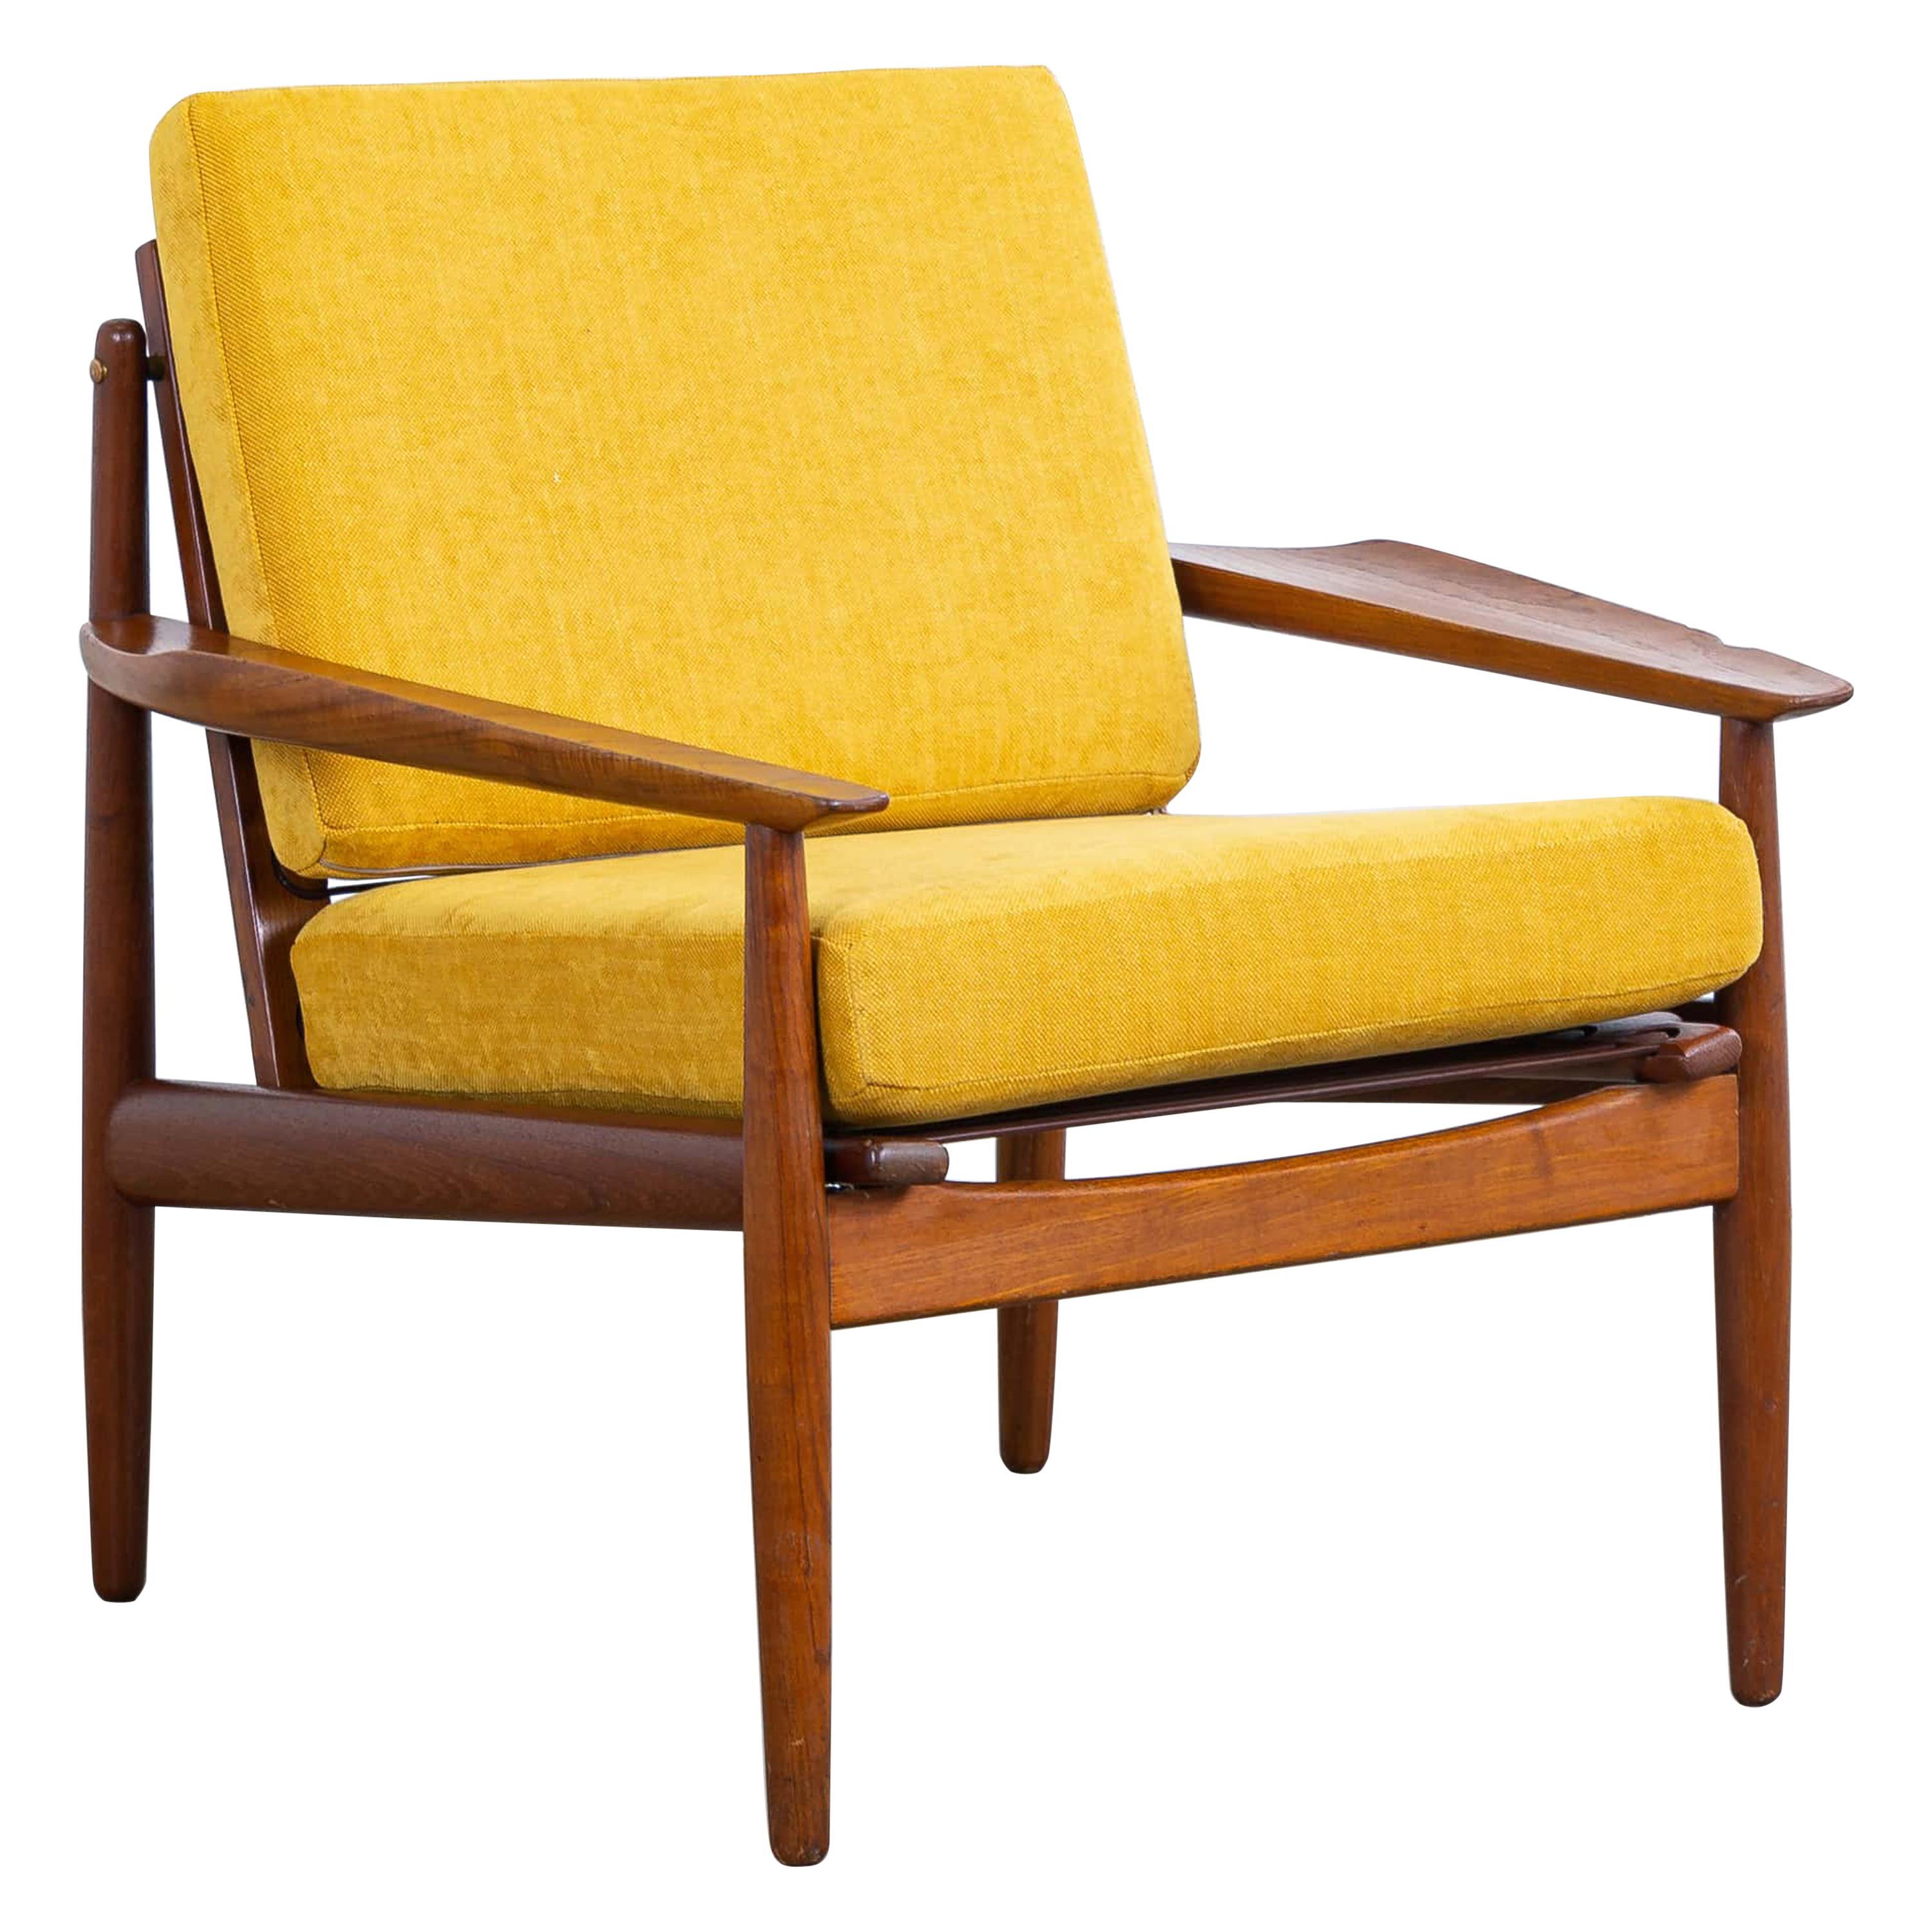 Midcentury Danish Easy Chair by Arne Vodder for Glostrup in Teak and Yellow For Sale